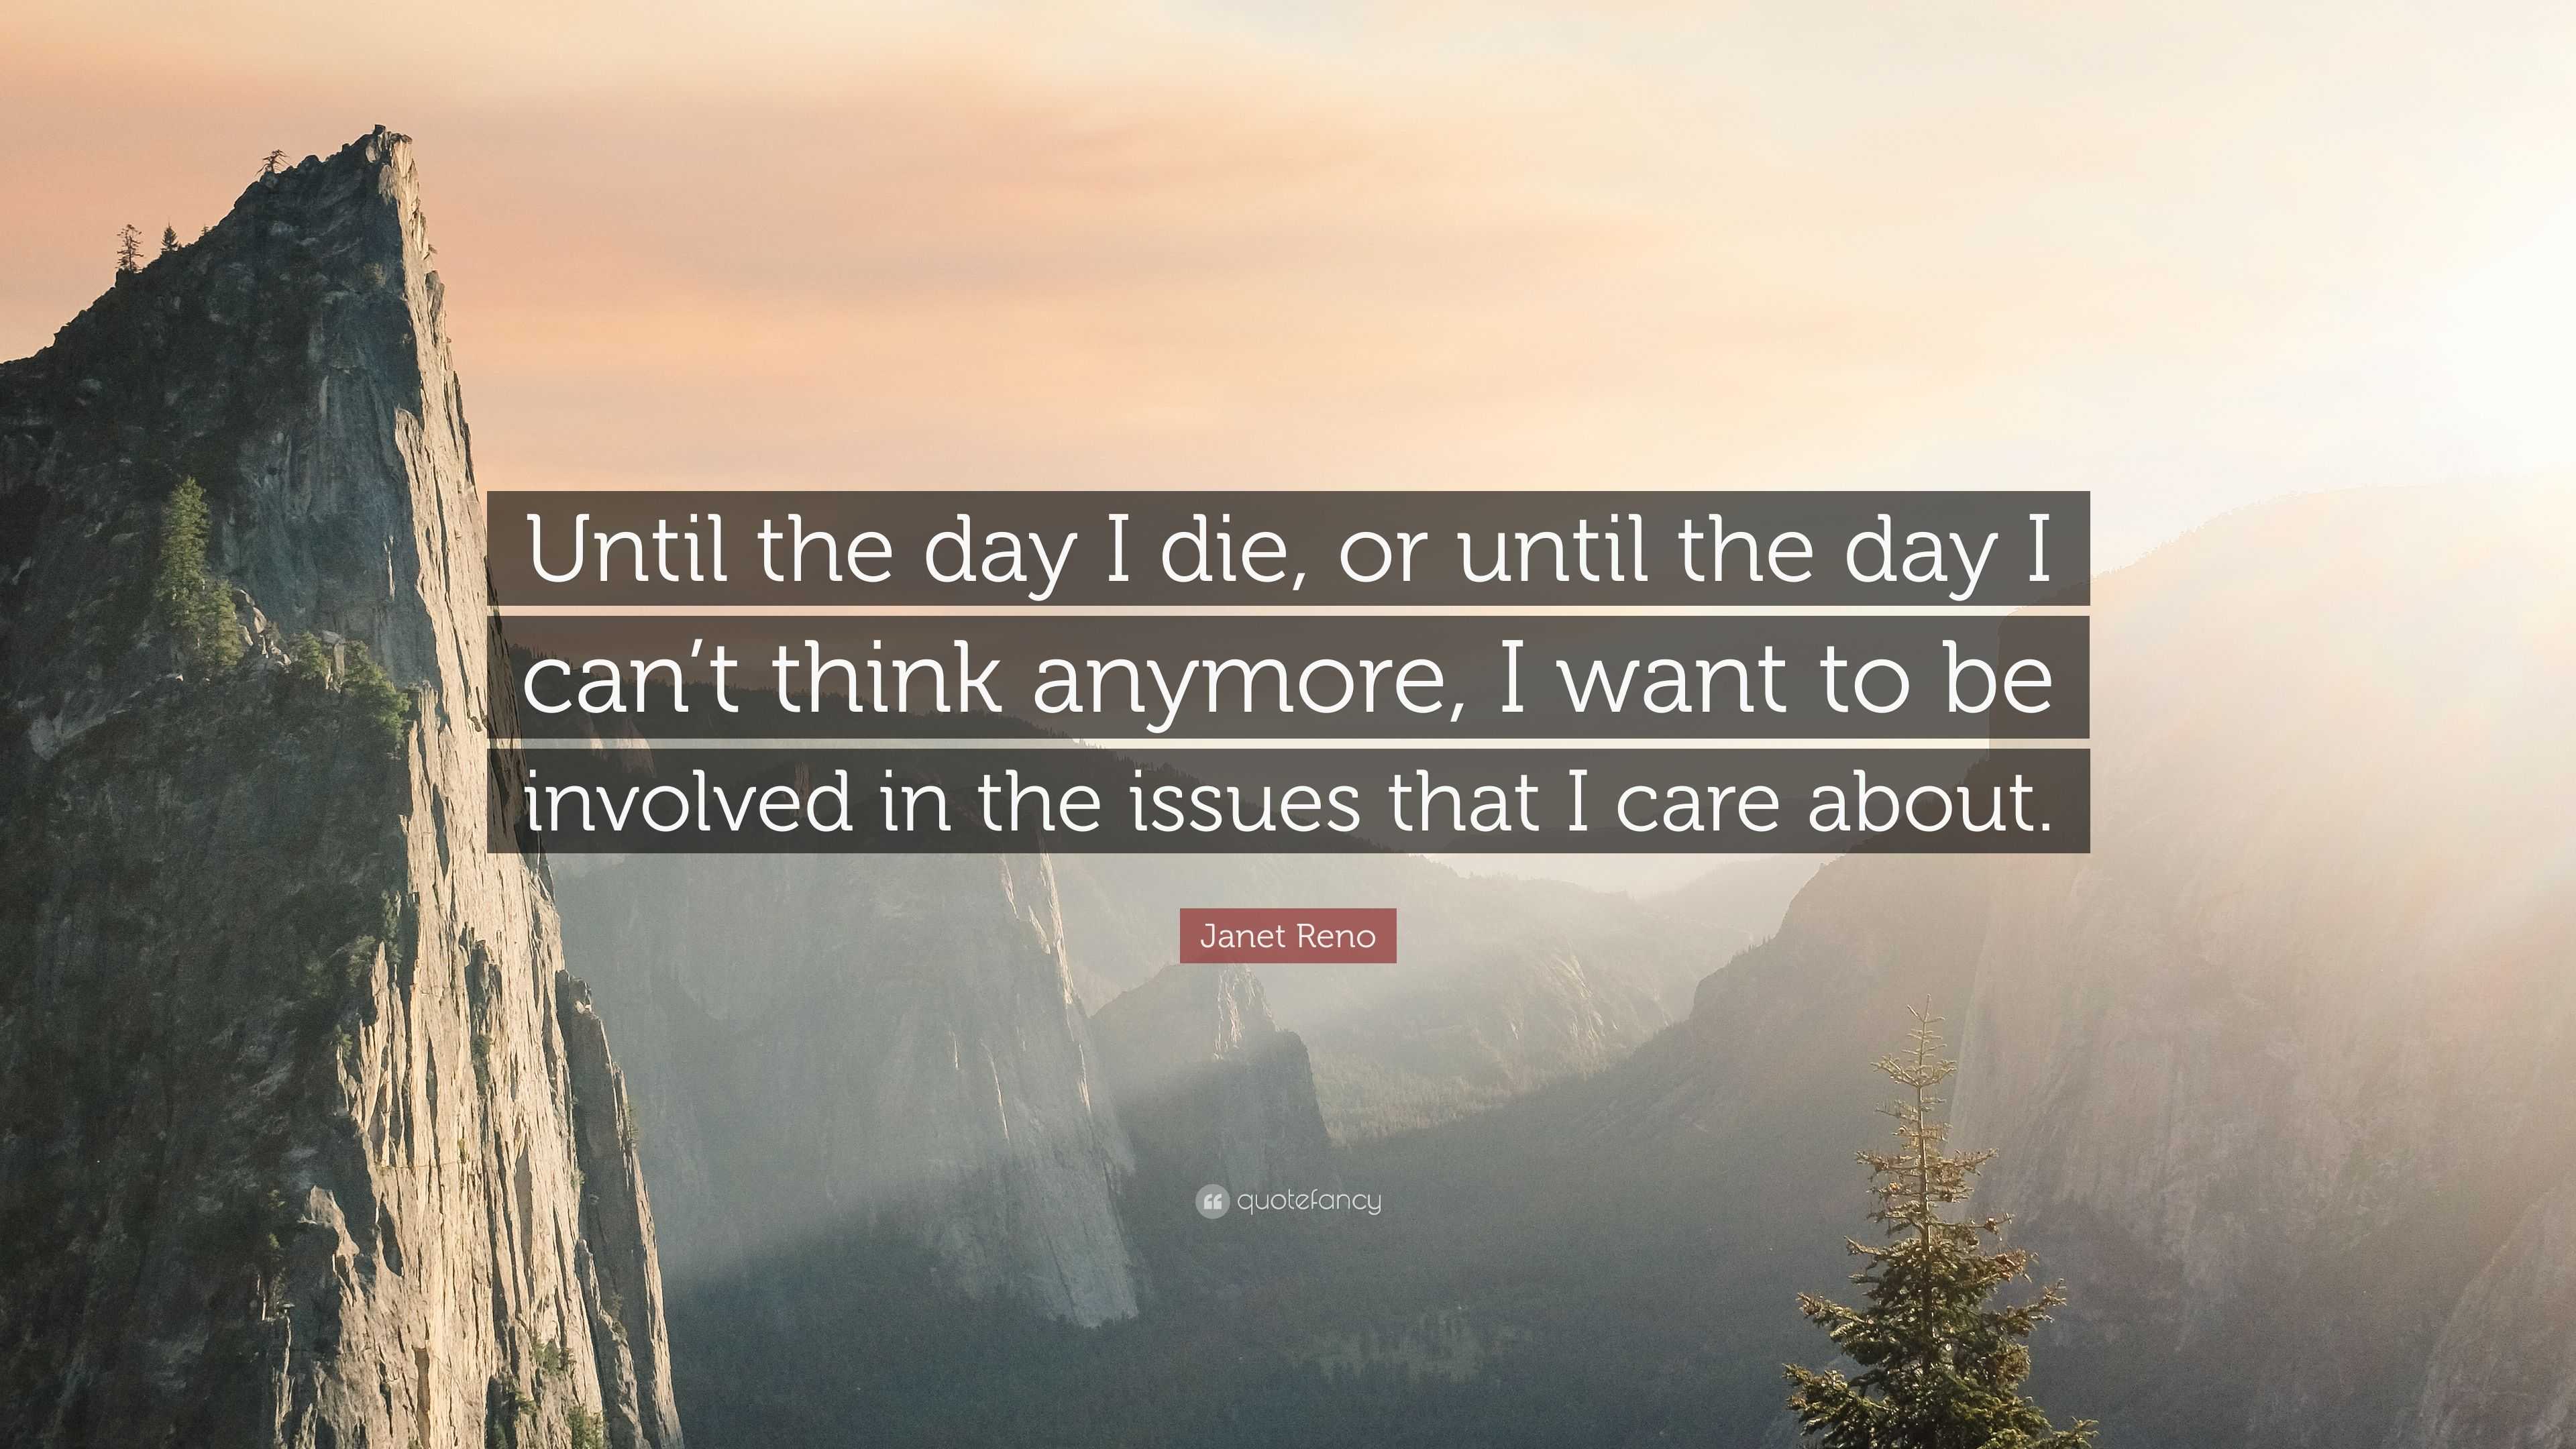 Janet Reno Quote: “Until the day I die